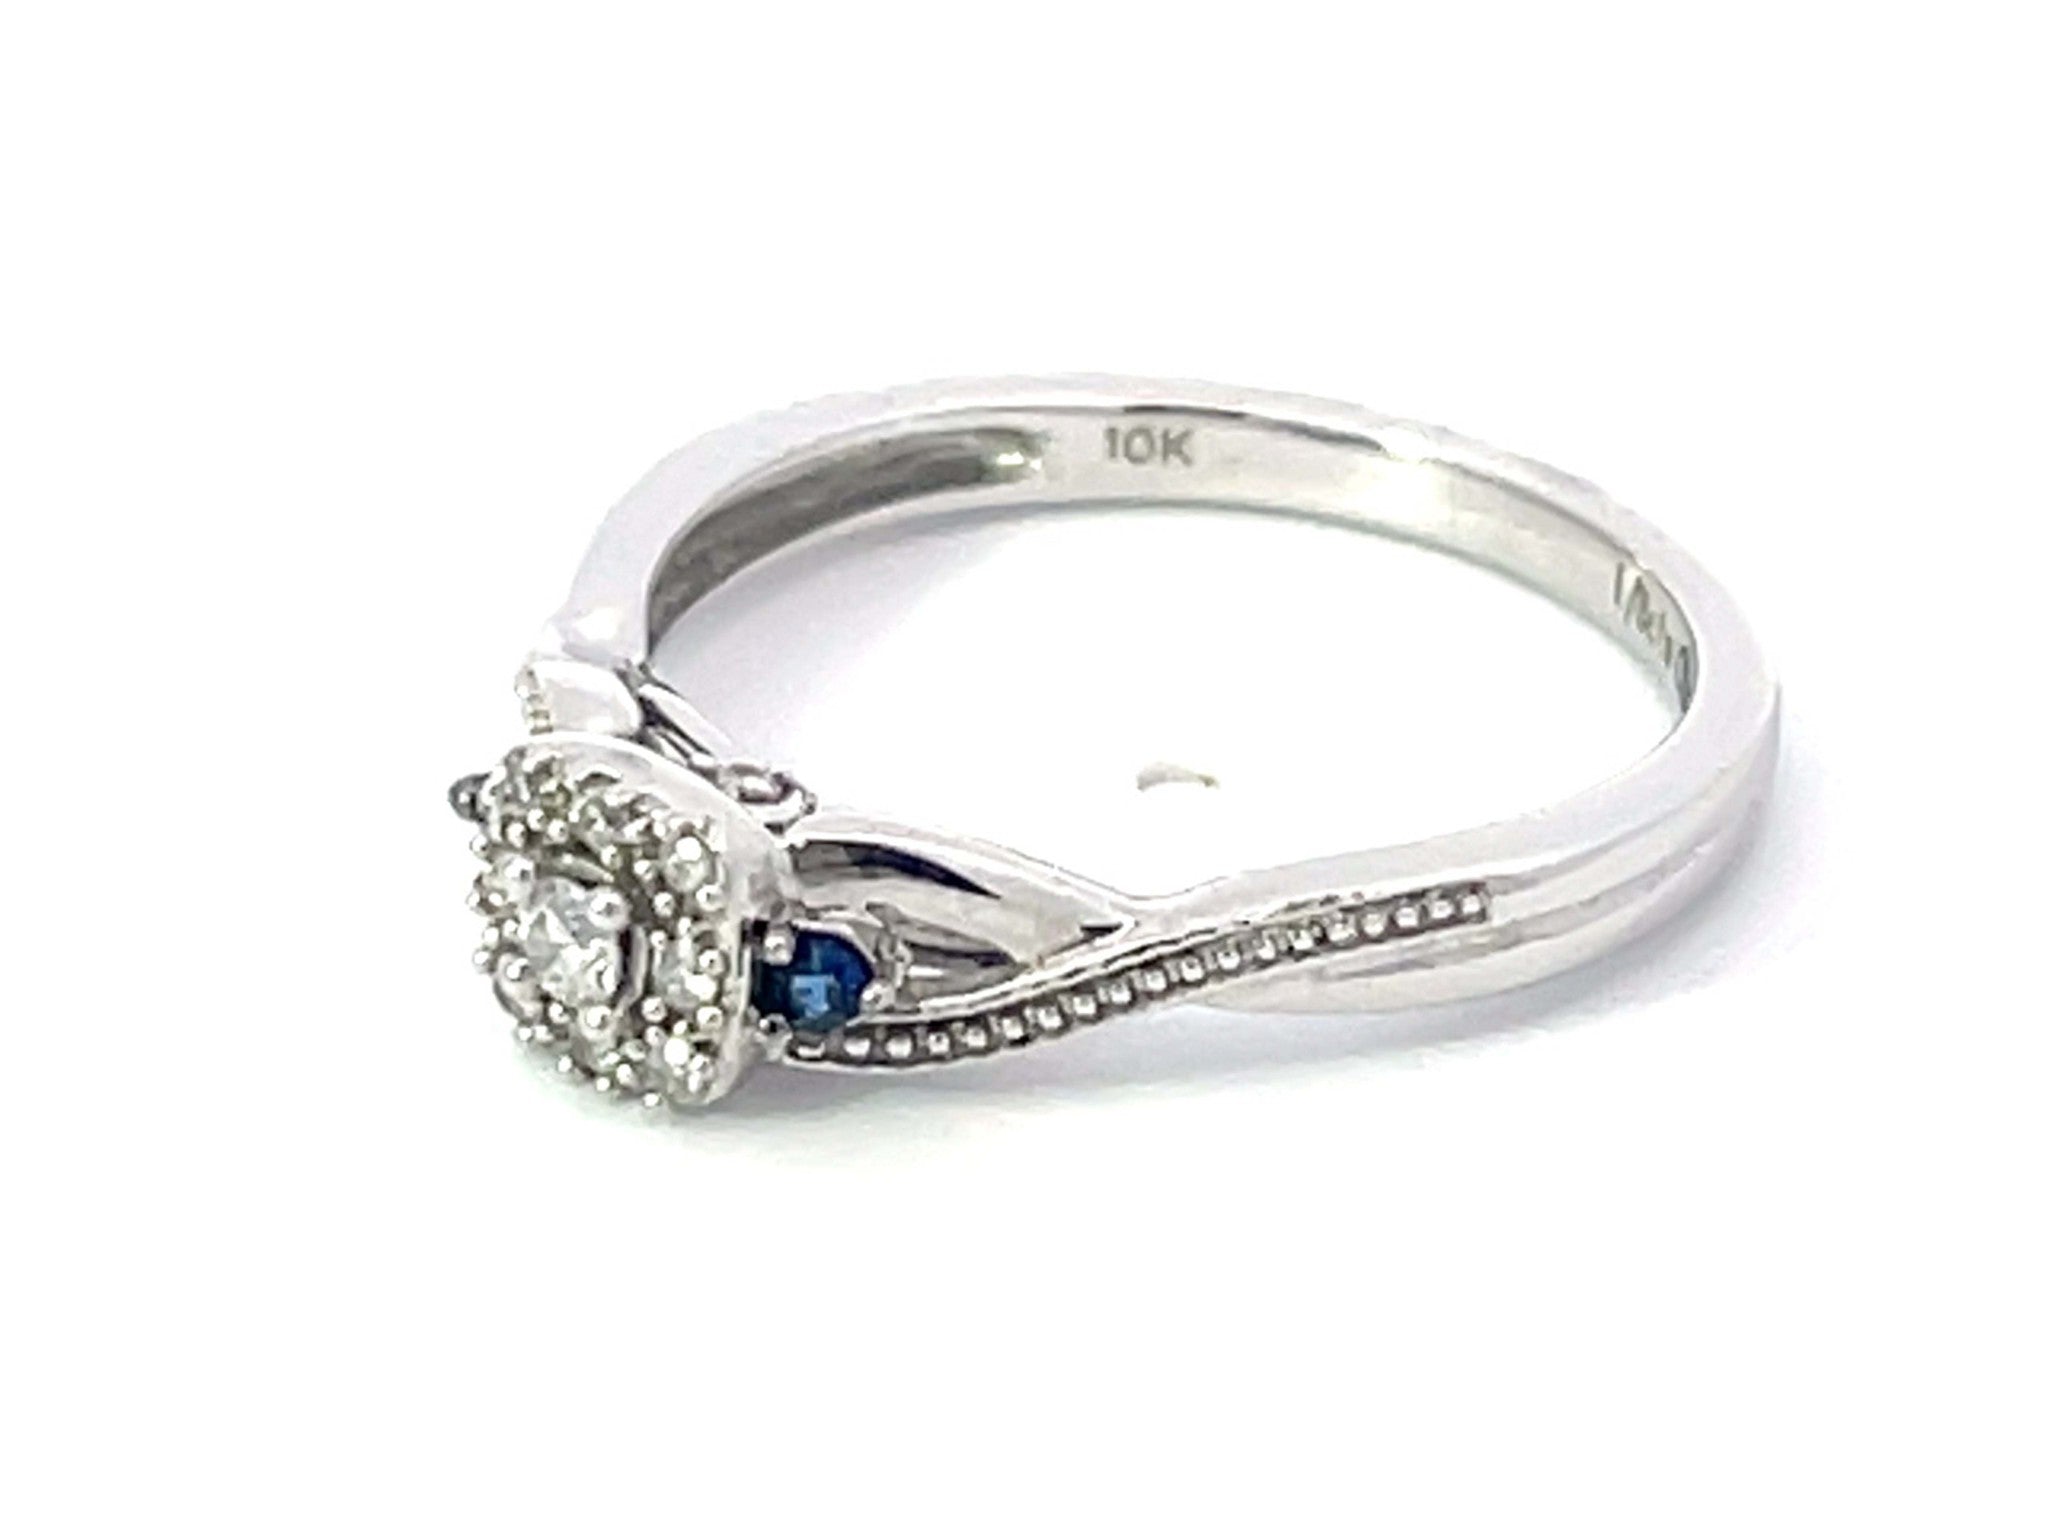 Diamond Halo and Sapphire Ring in 10k White Gold